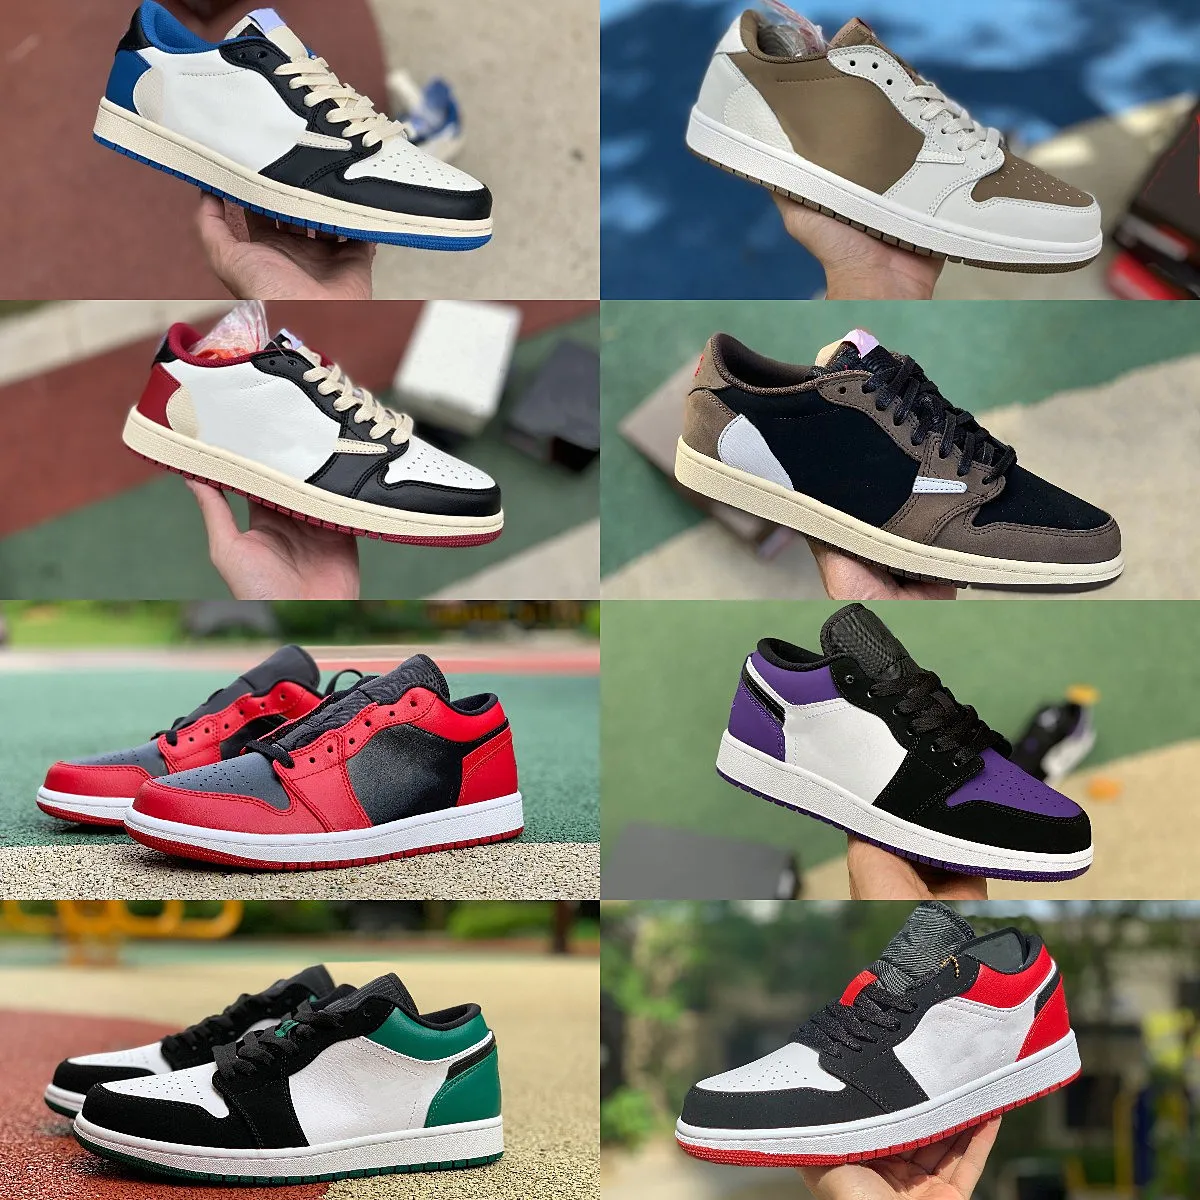 2022 Jumpman x 1 Low Low Casual Basketer Shoes 1S Fragment White Brown Red Gold Presed UNC Wolf Gray Silver Toe Toe Toe Shadow Trainer Switchers P8